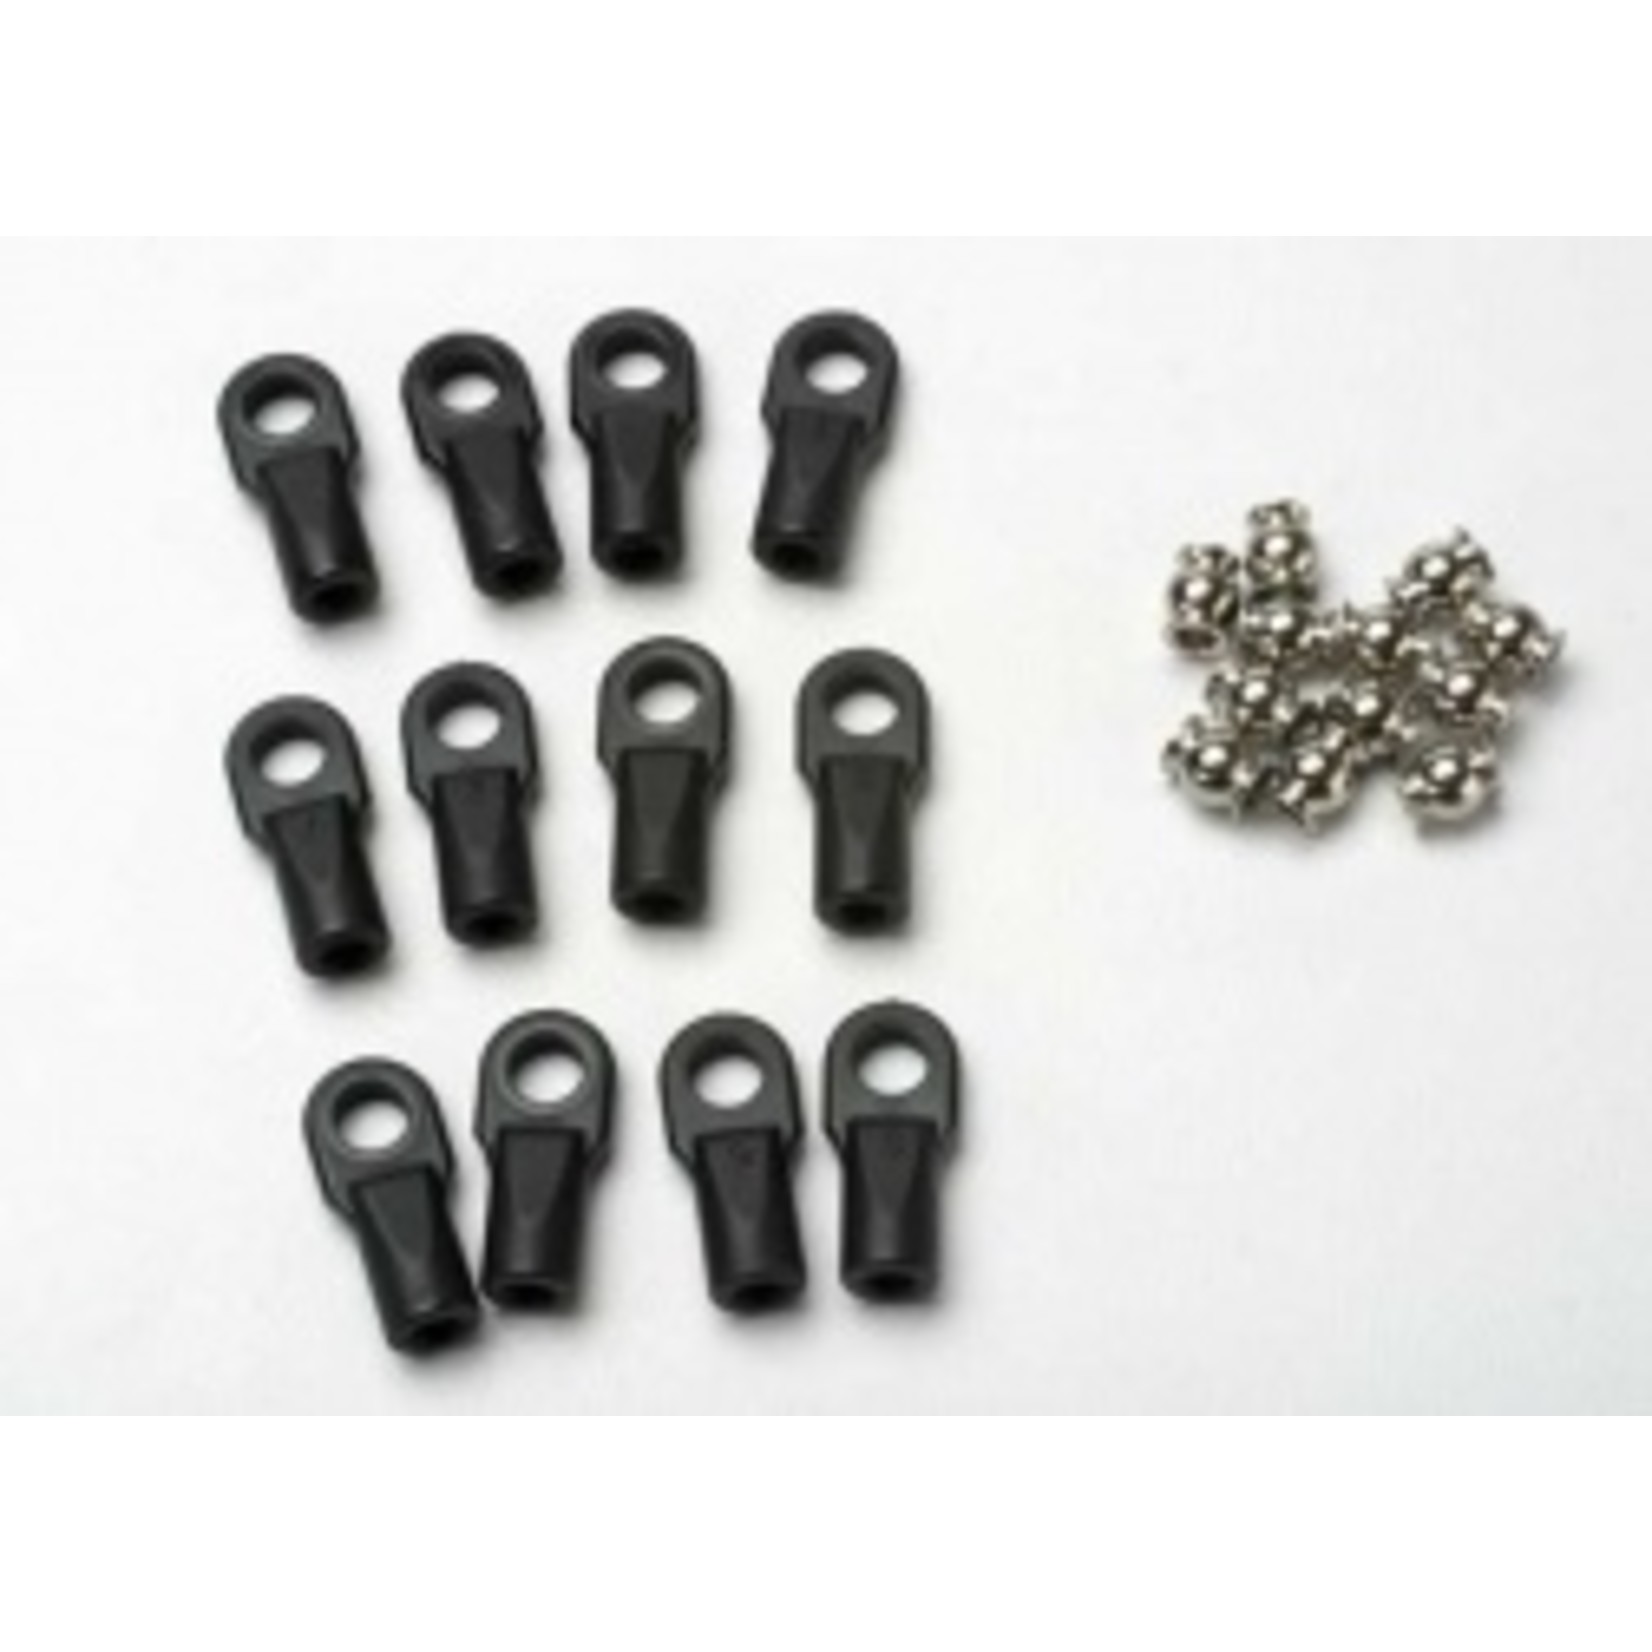 Traxxas 5347 Rod ends, Revo® (large) with hollow balls (12)